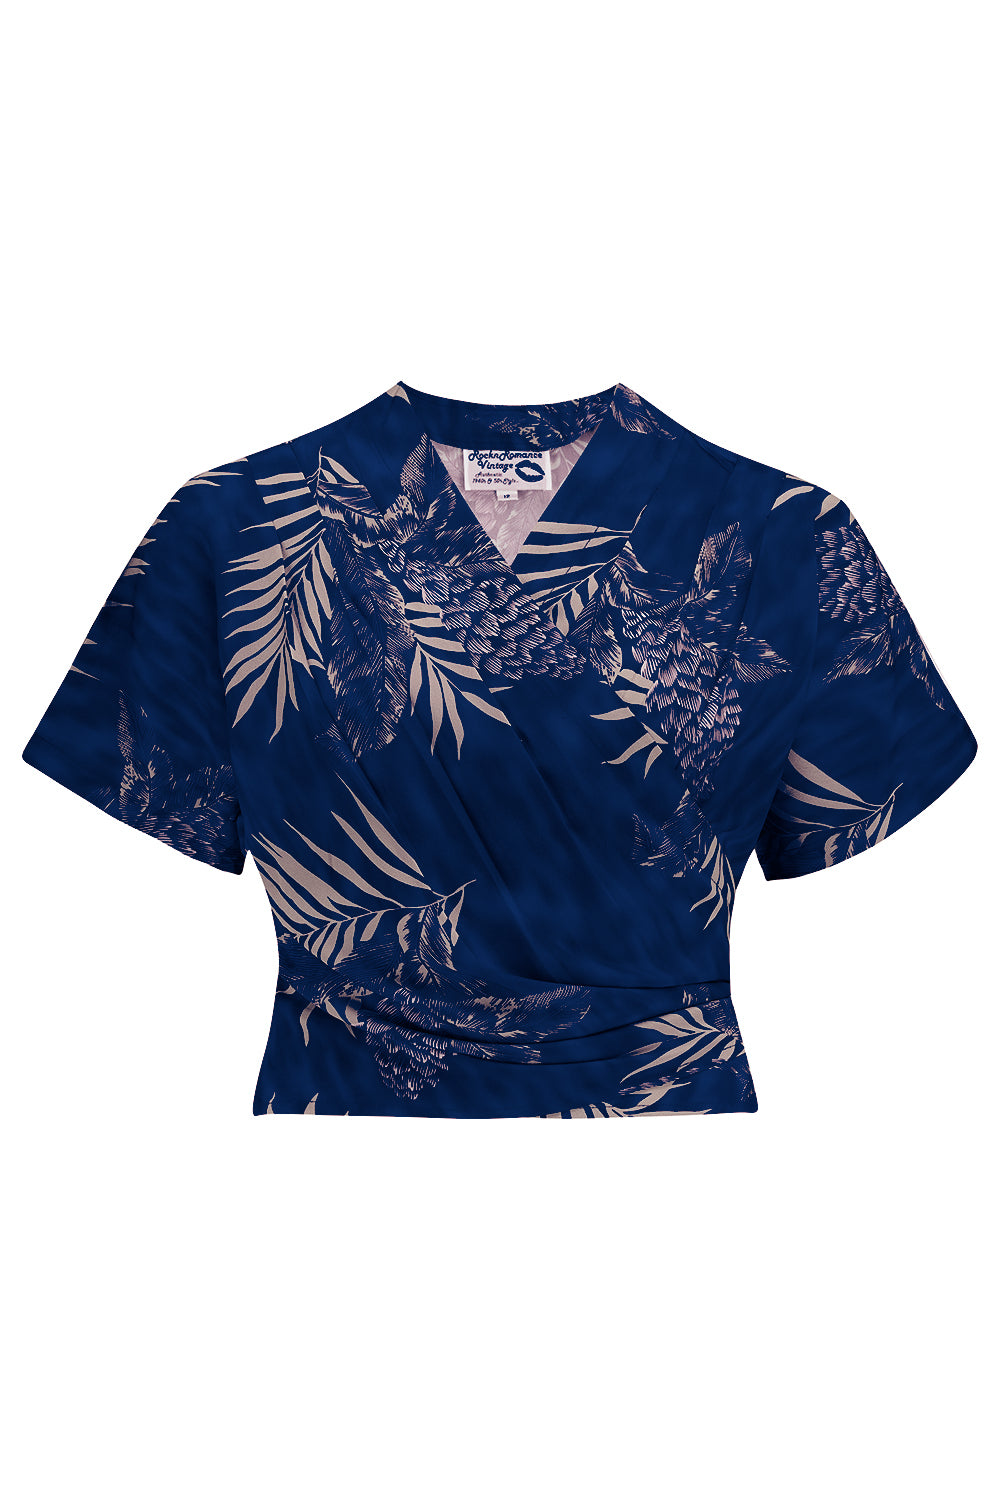 The "Darla" Short Sleeve Wrap Blouse in Sappire Palm Print, True Vintage Style